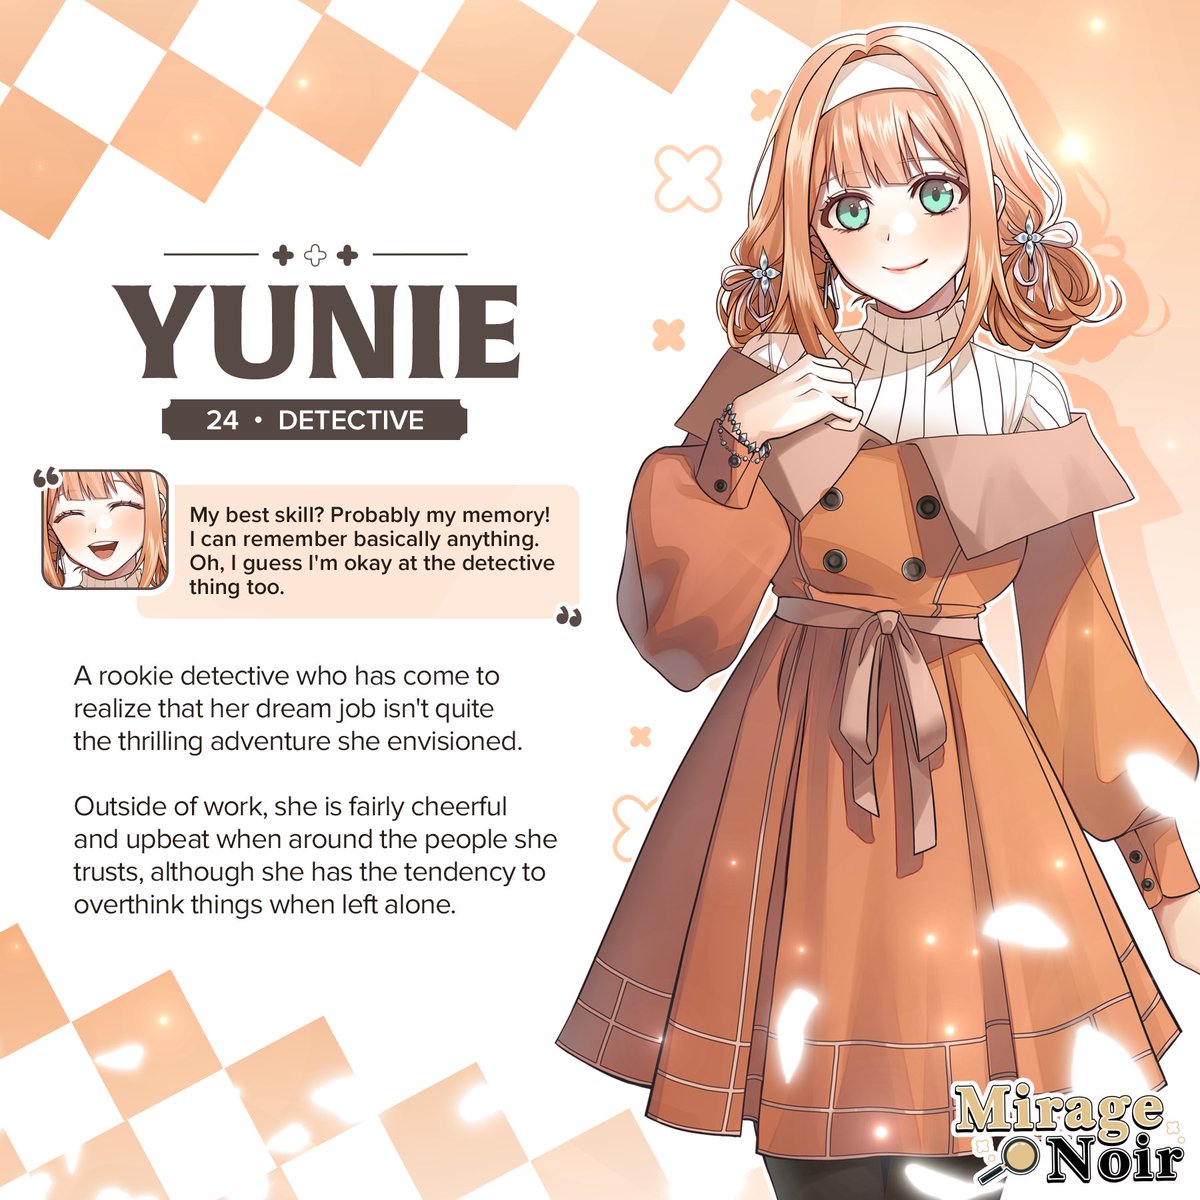 🔍 Character Introduction Meet our protagonist Yunie (name changeable), a detective on the hunt for her first case. She has a lively personality and an even livelier imagination.